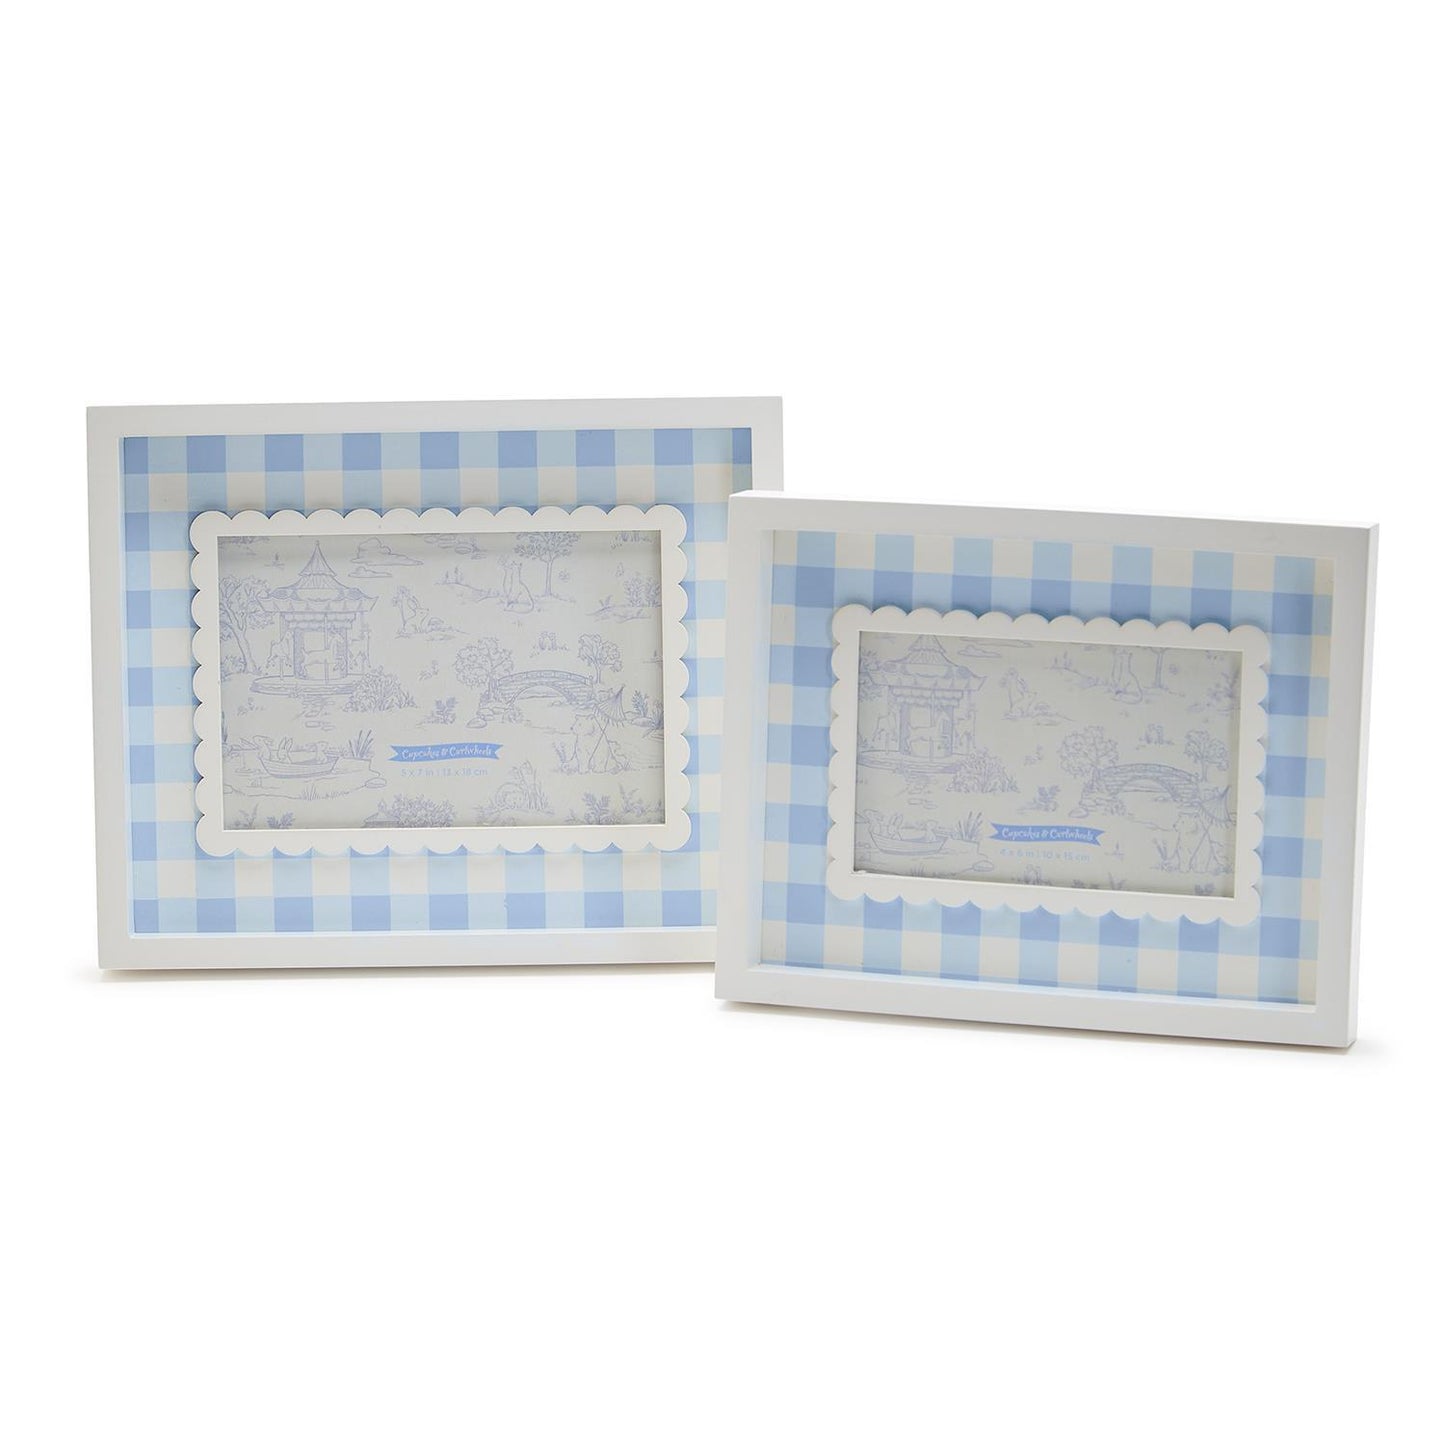 Blue Gingham Photo Frames in sizes 4" x 6" and 5" x 7"